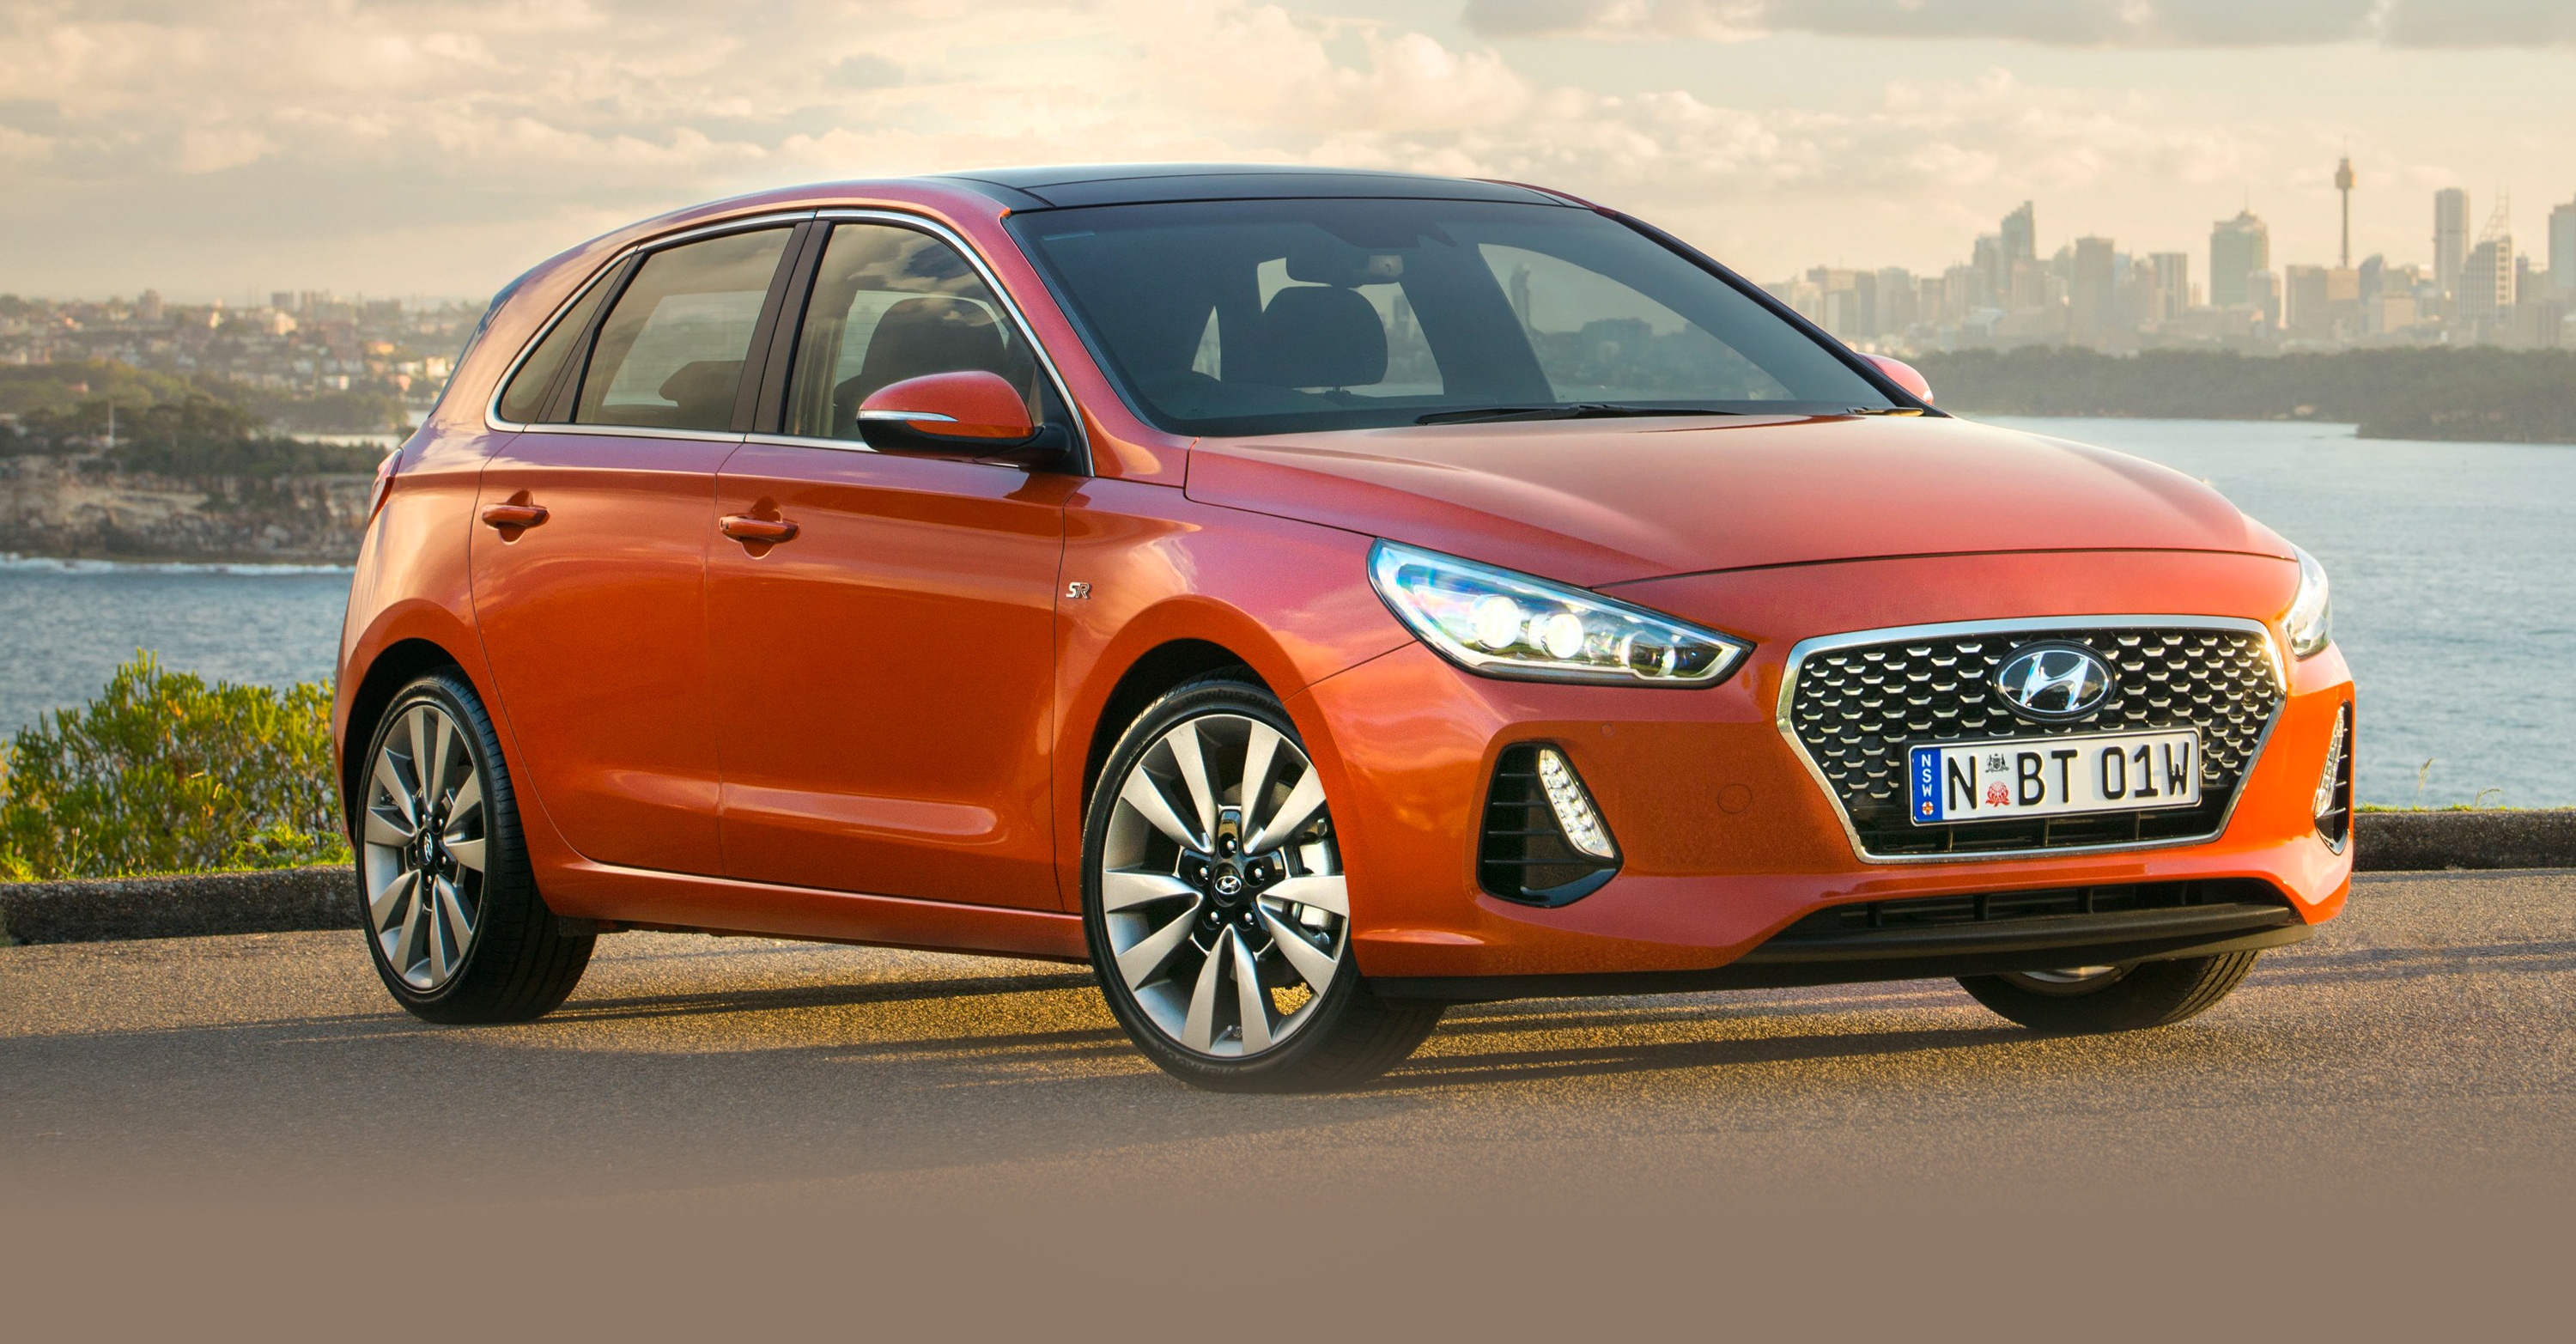 2017 Hyundai i30 pricing and specs: All-new hatch promises top value ...